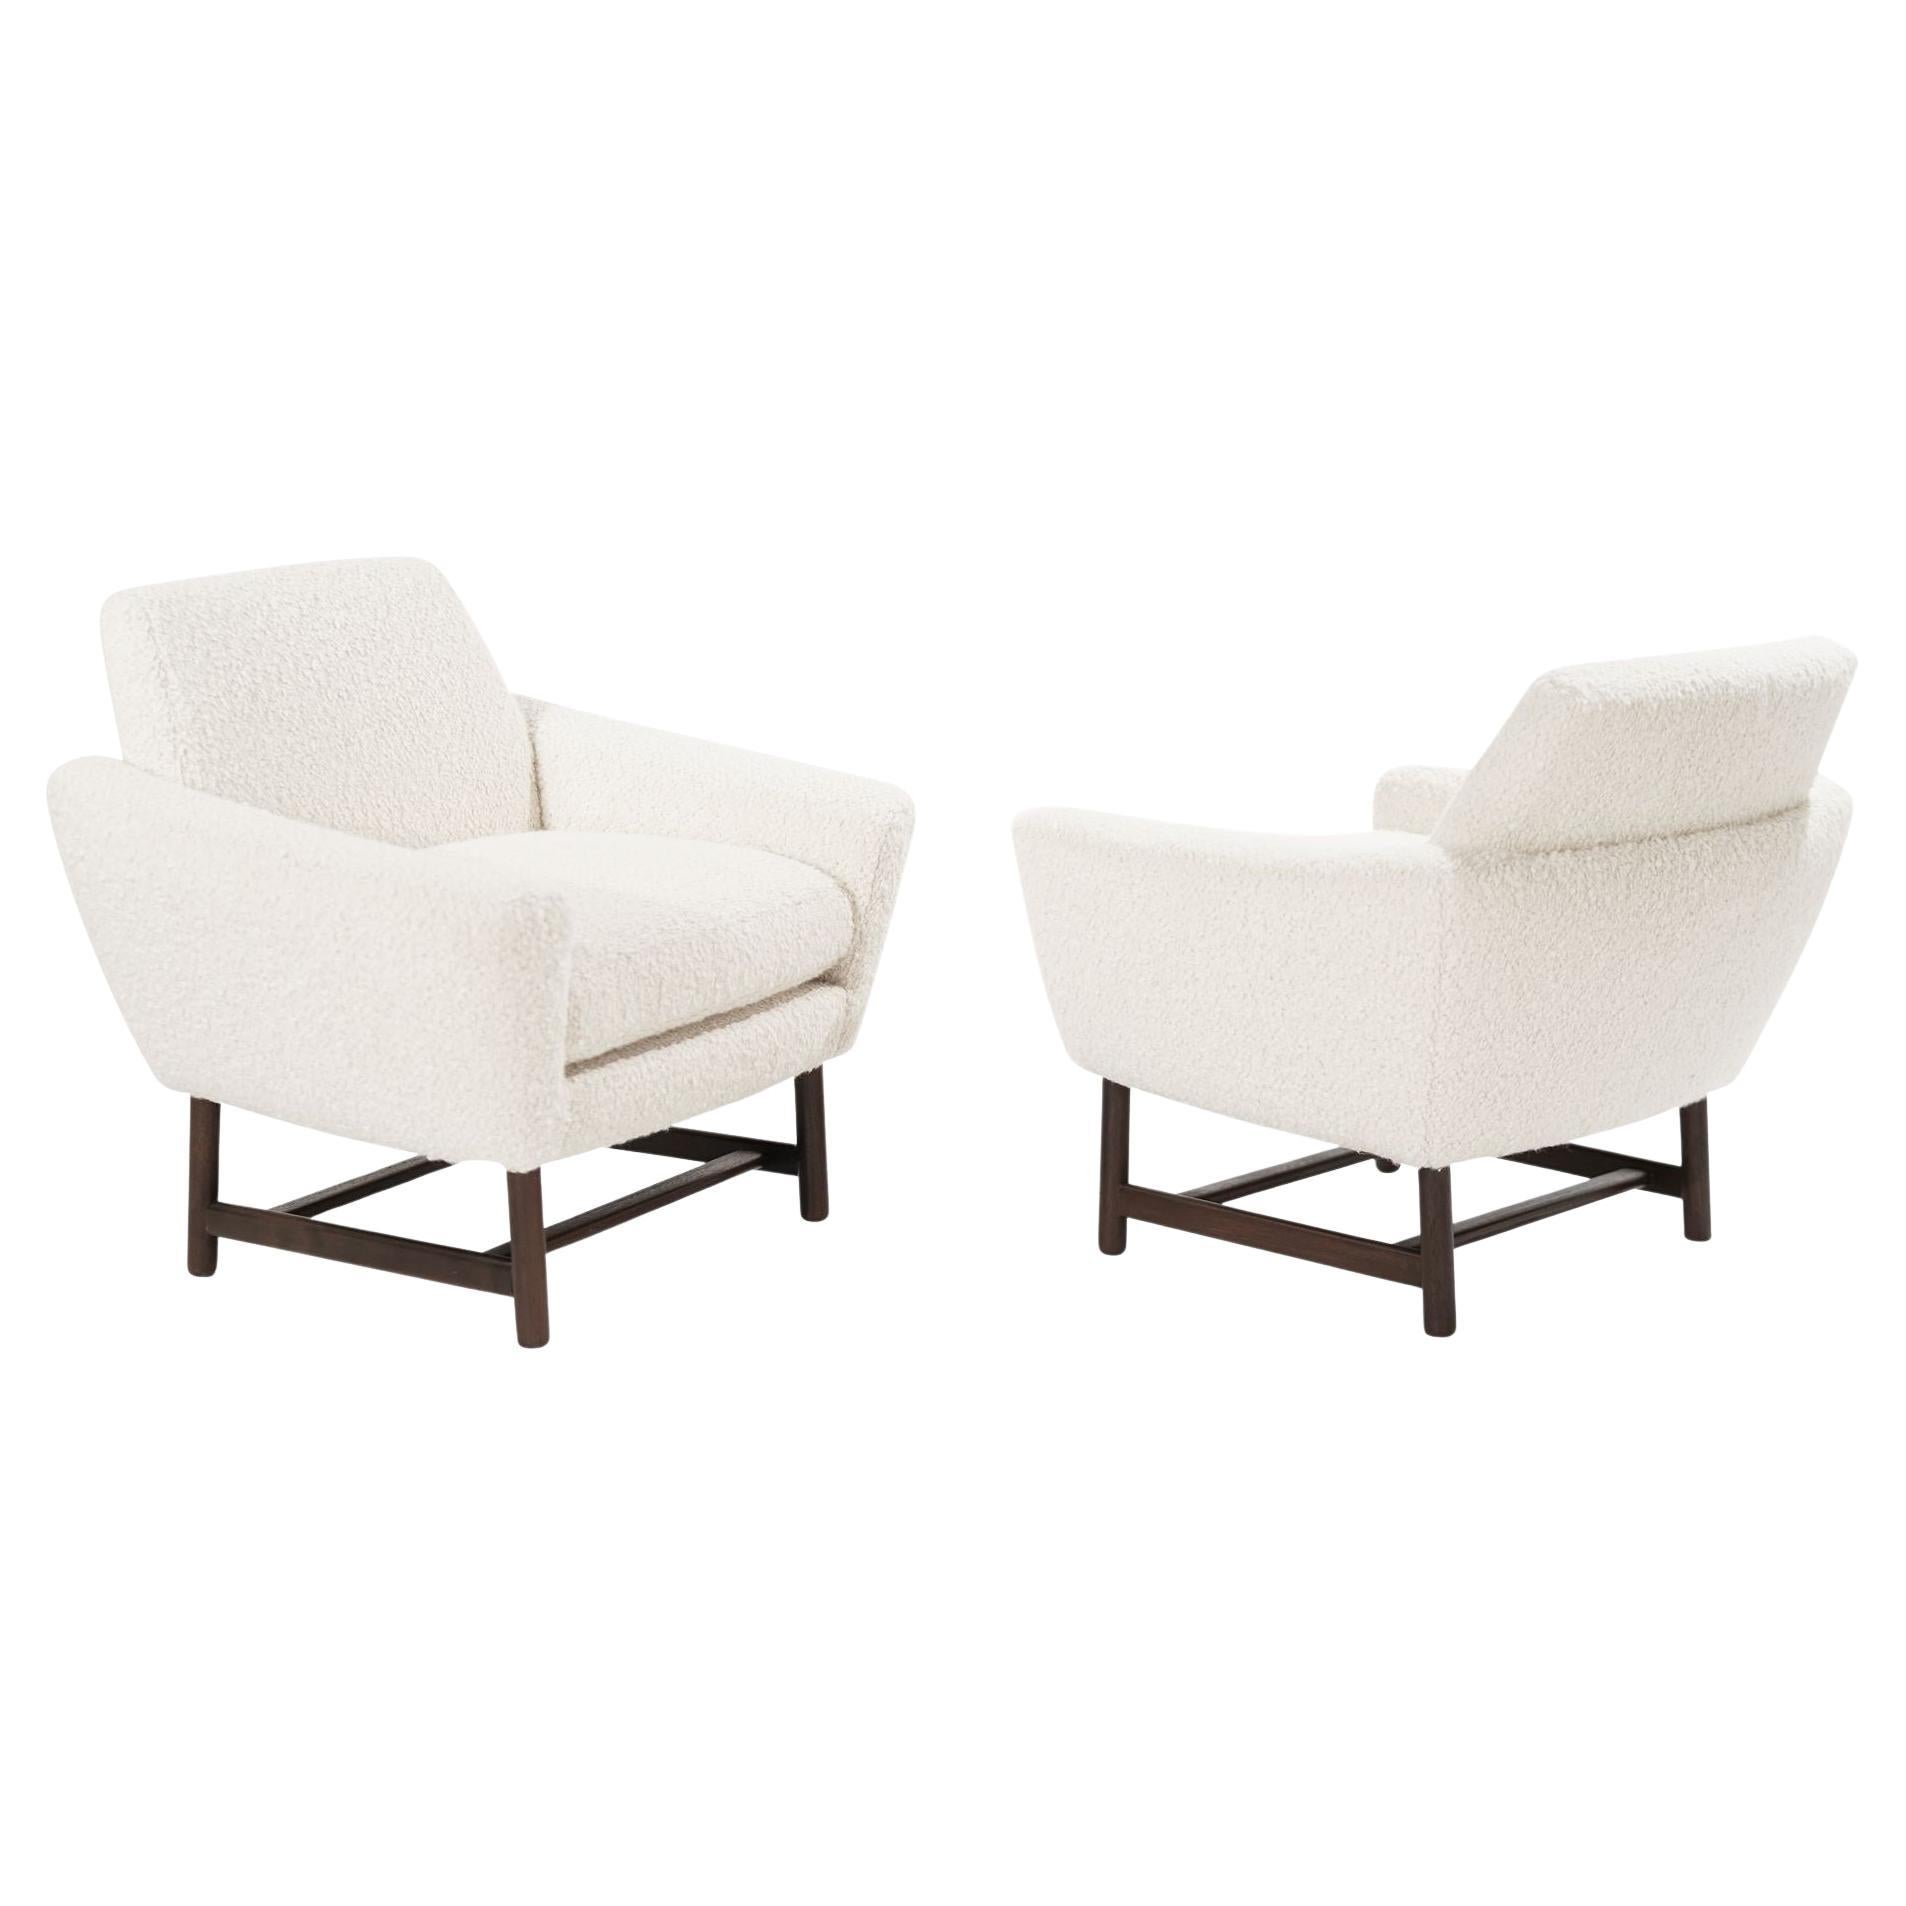 Sculptural Low-Profile Lounge Chairs in Bouclé, Denmark, 1950s For Sale